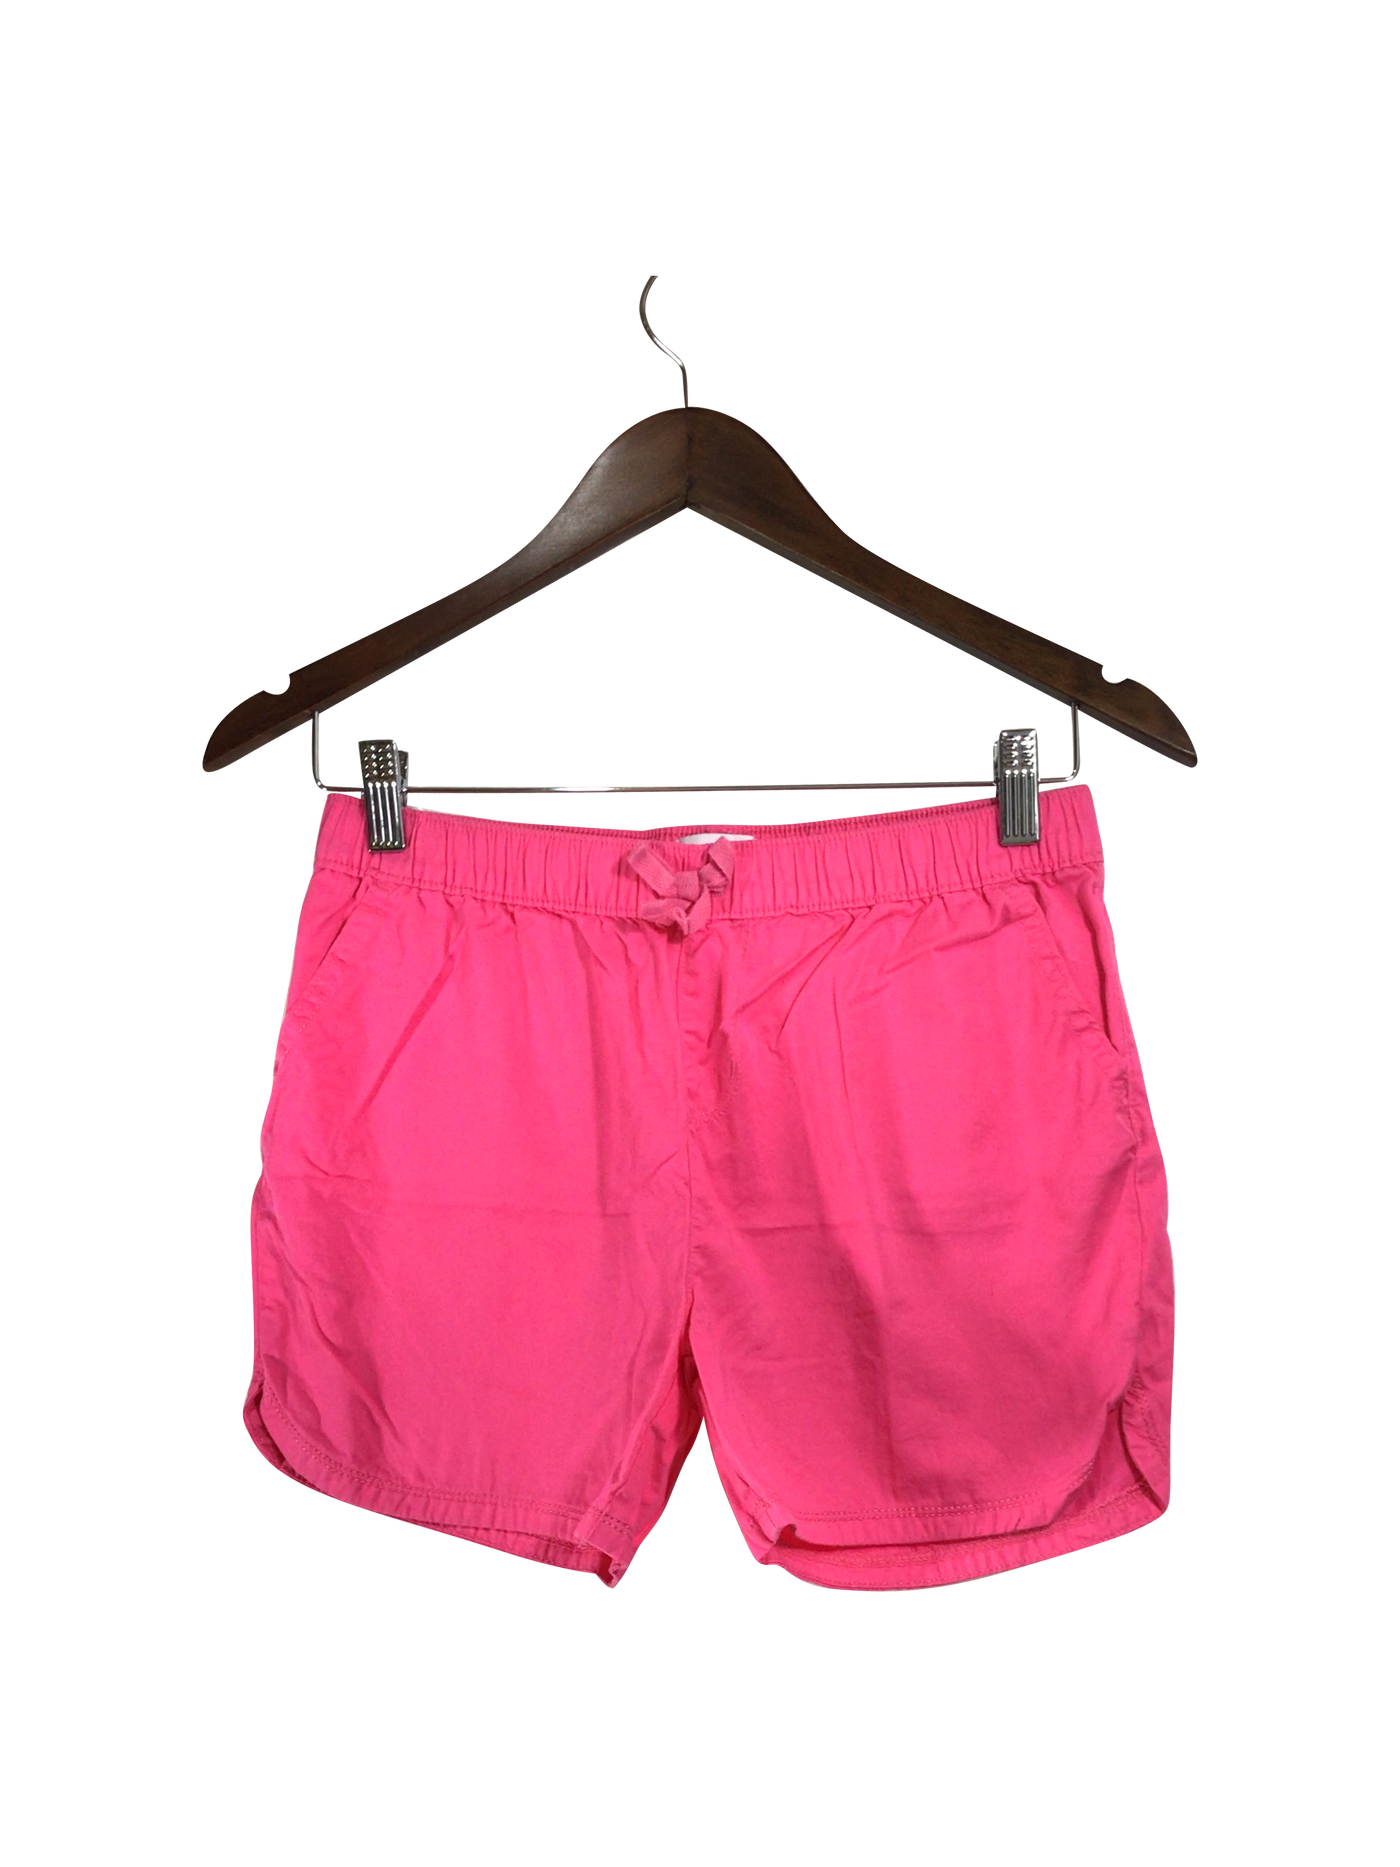 THE CHILDREN'S PLACE Pant Shorts Regular fit in Pink - Size 14 | 3.84 $ KOOP